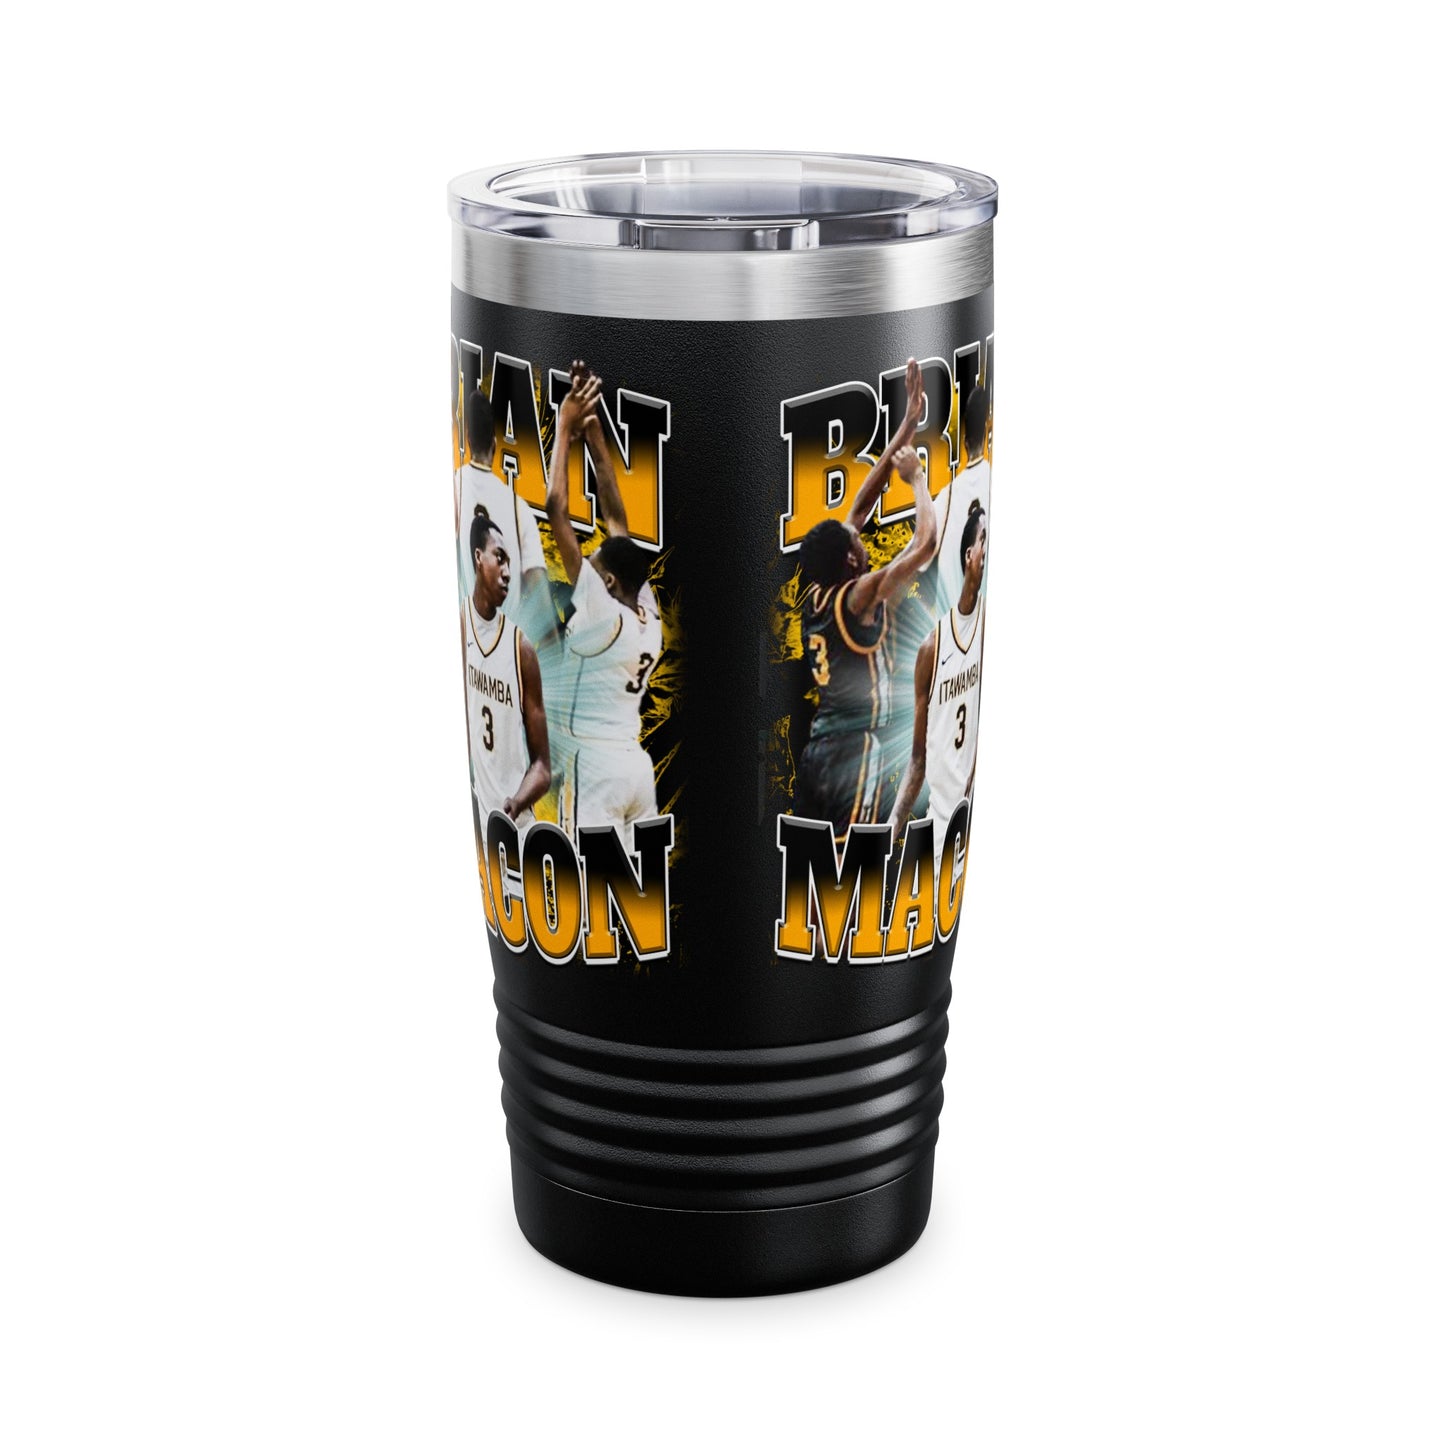 Brian Macon Stainless Steal Tumbler